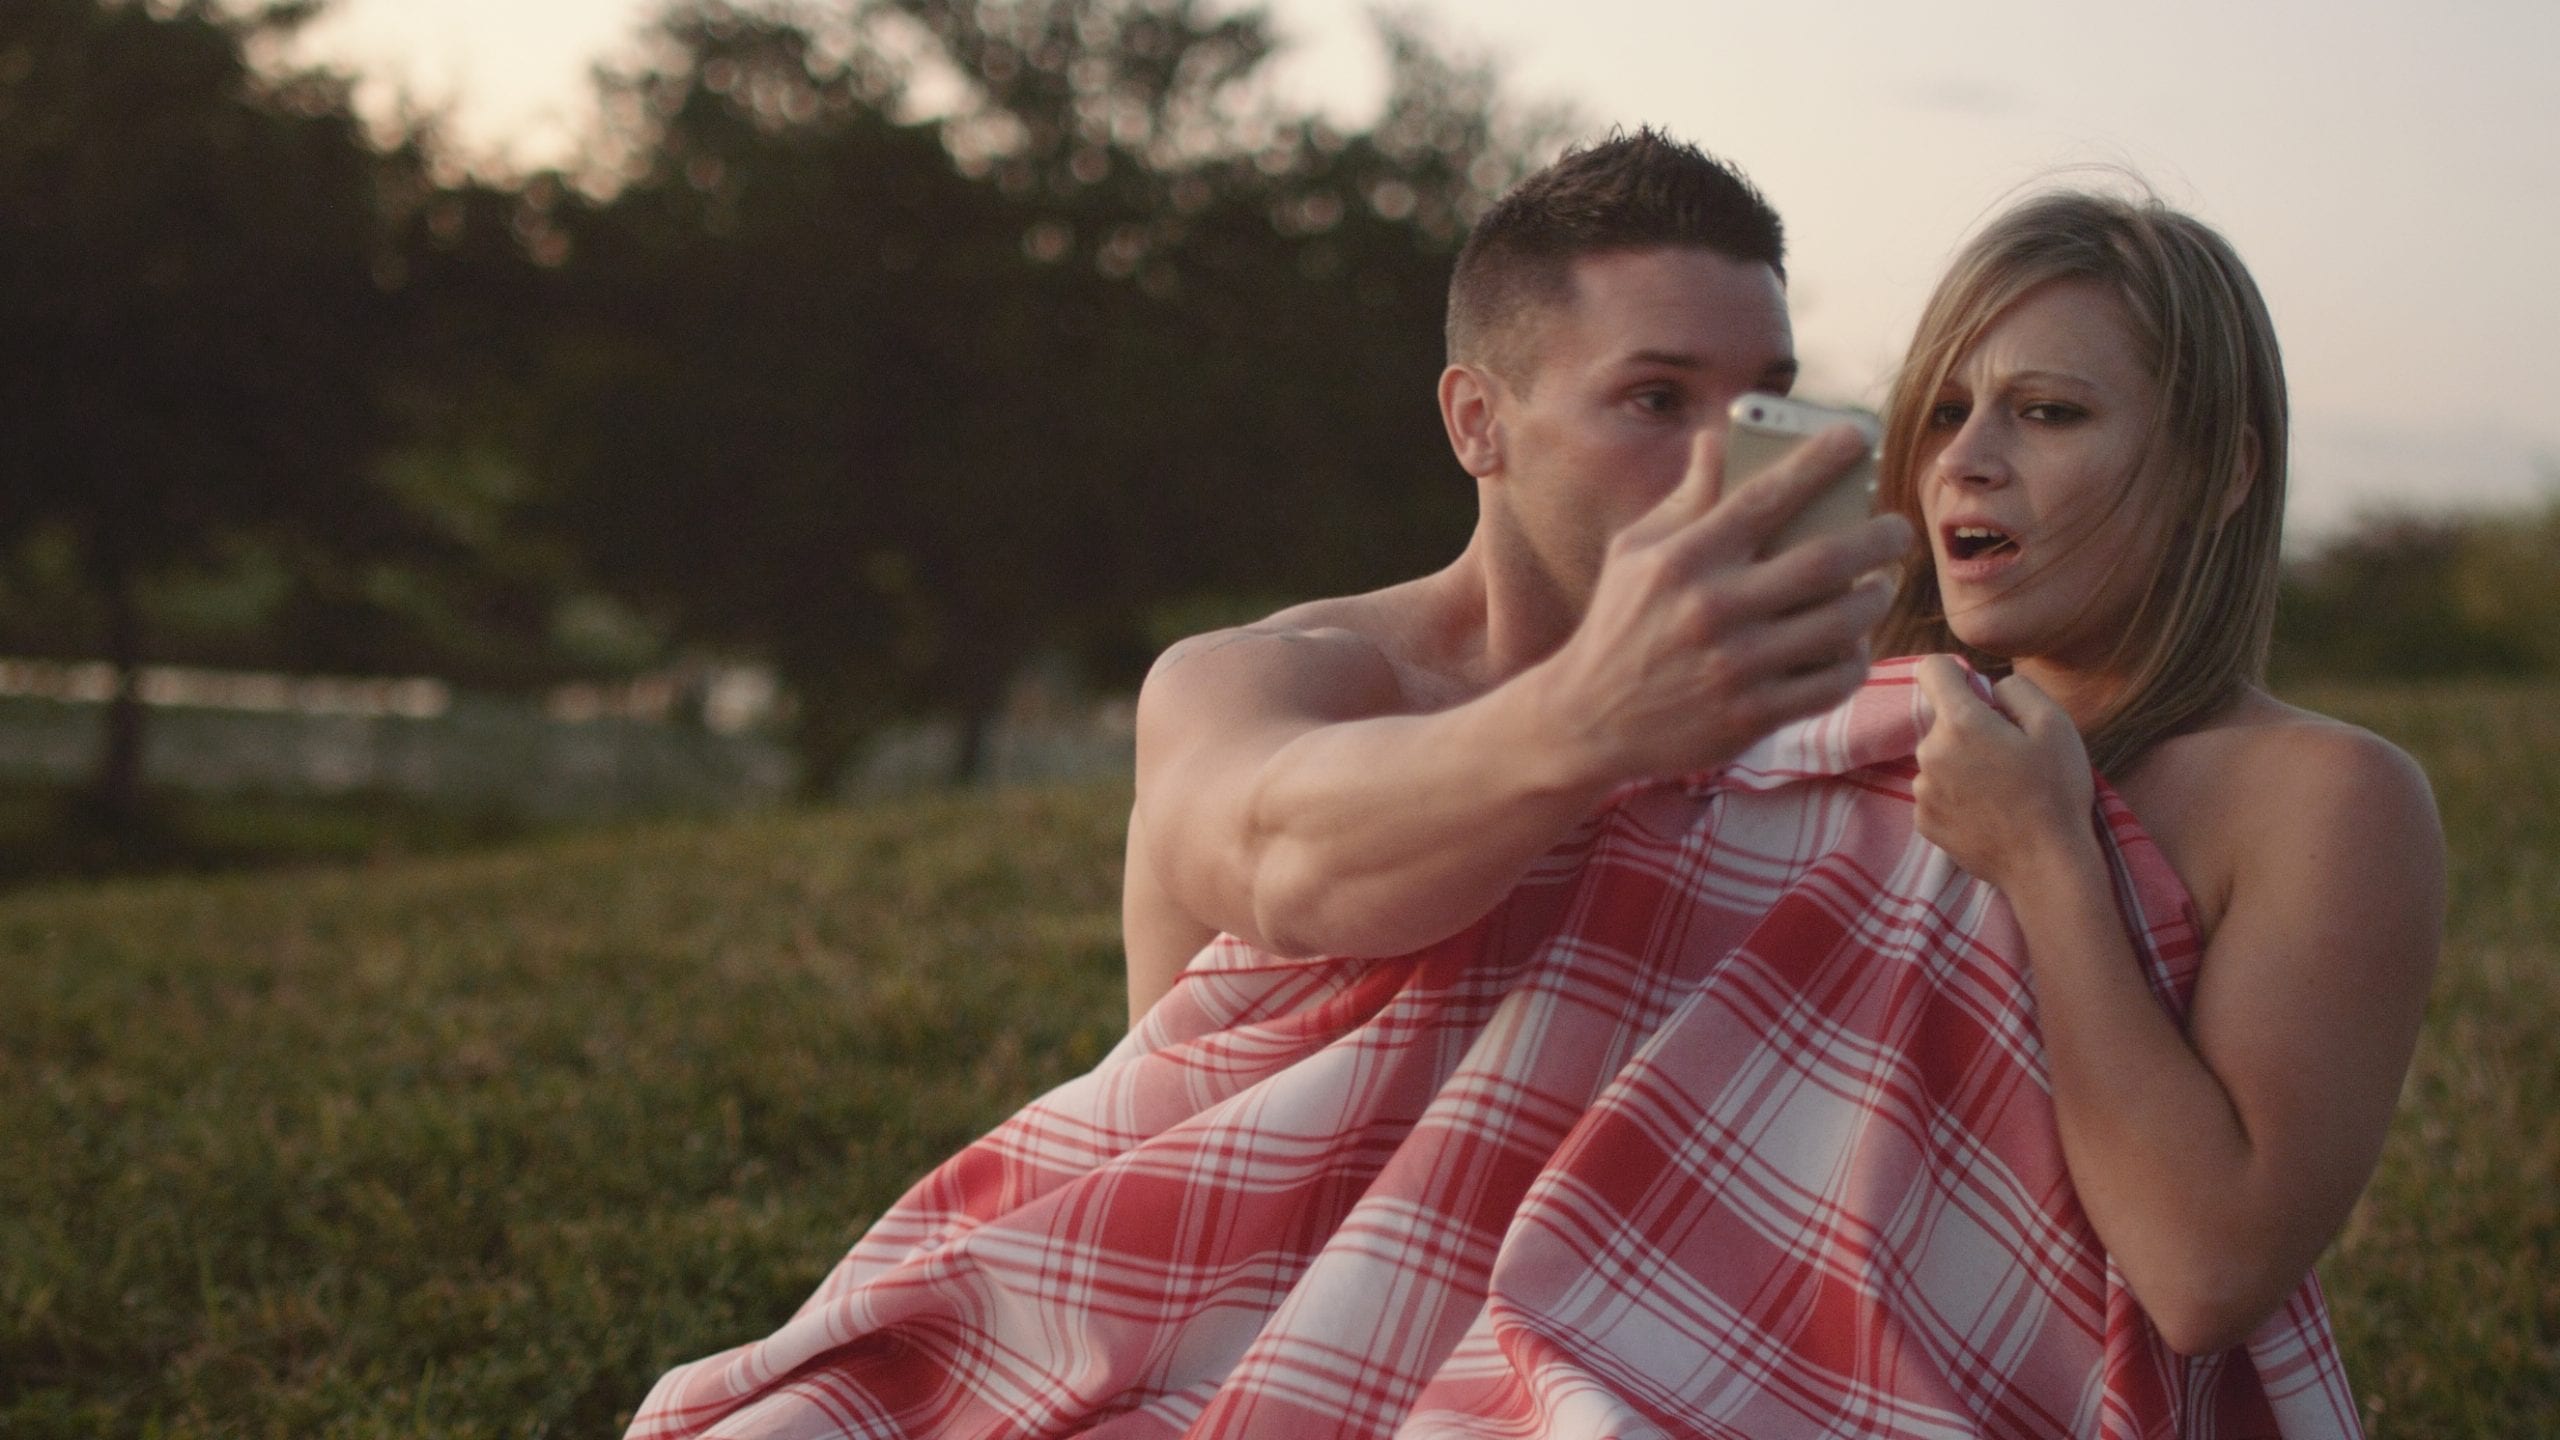 Young man and woman under a red and white blanket with man showing woman something on his phone and woman reacting negatively to it